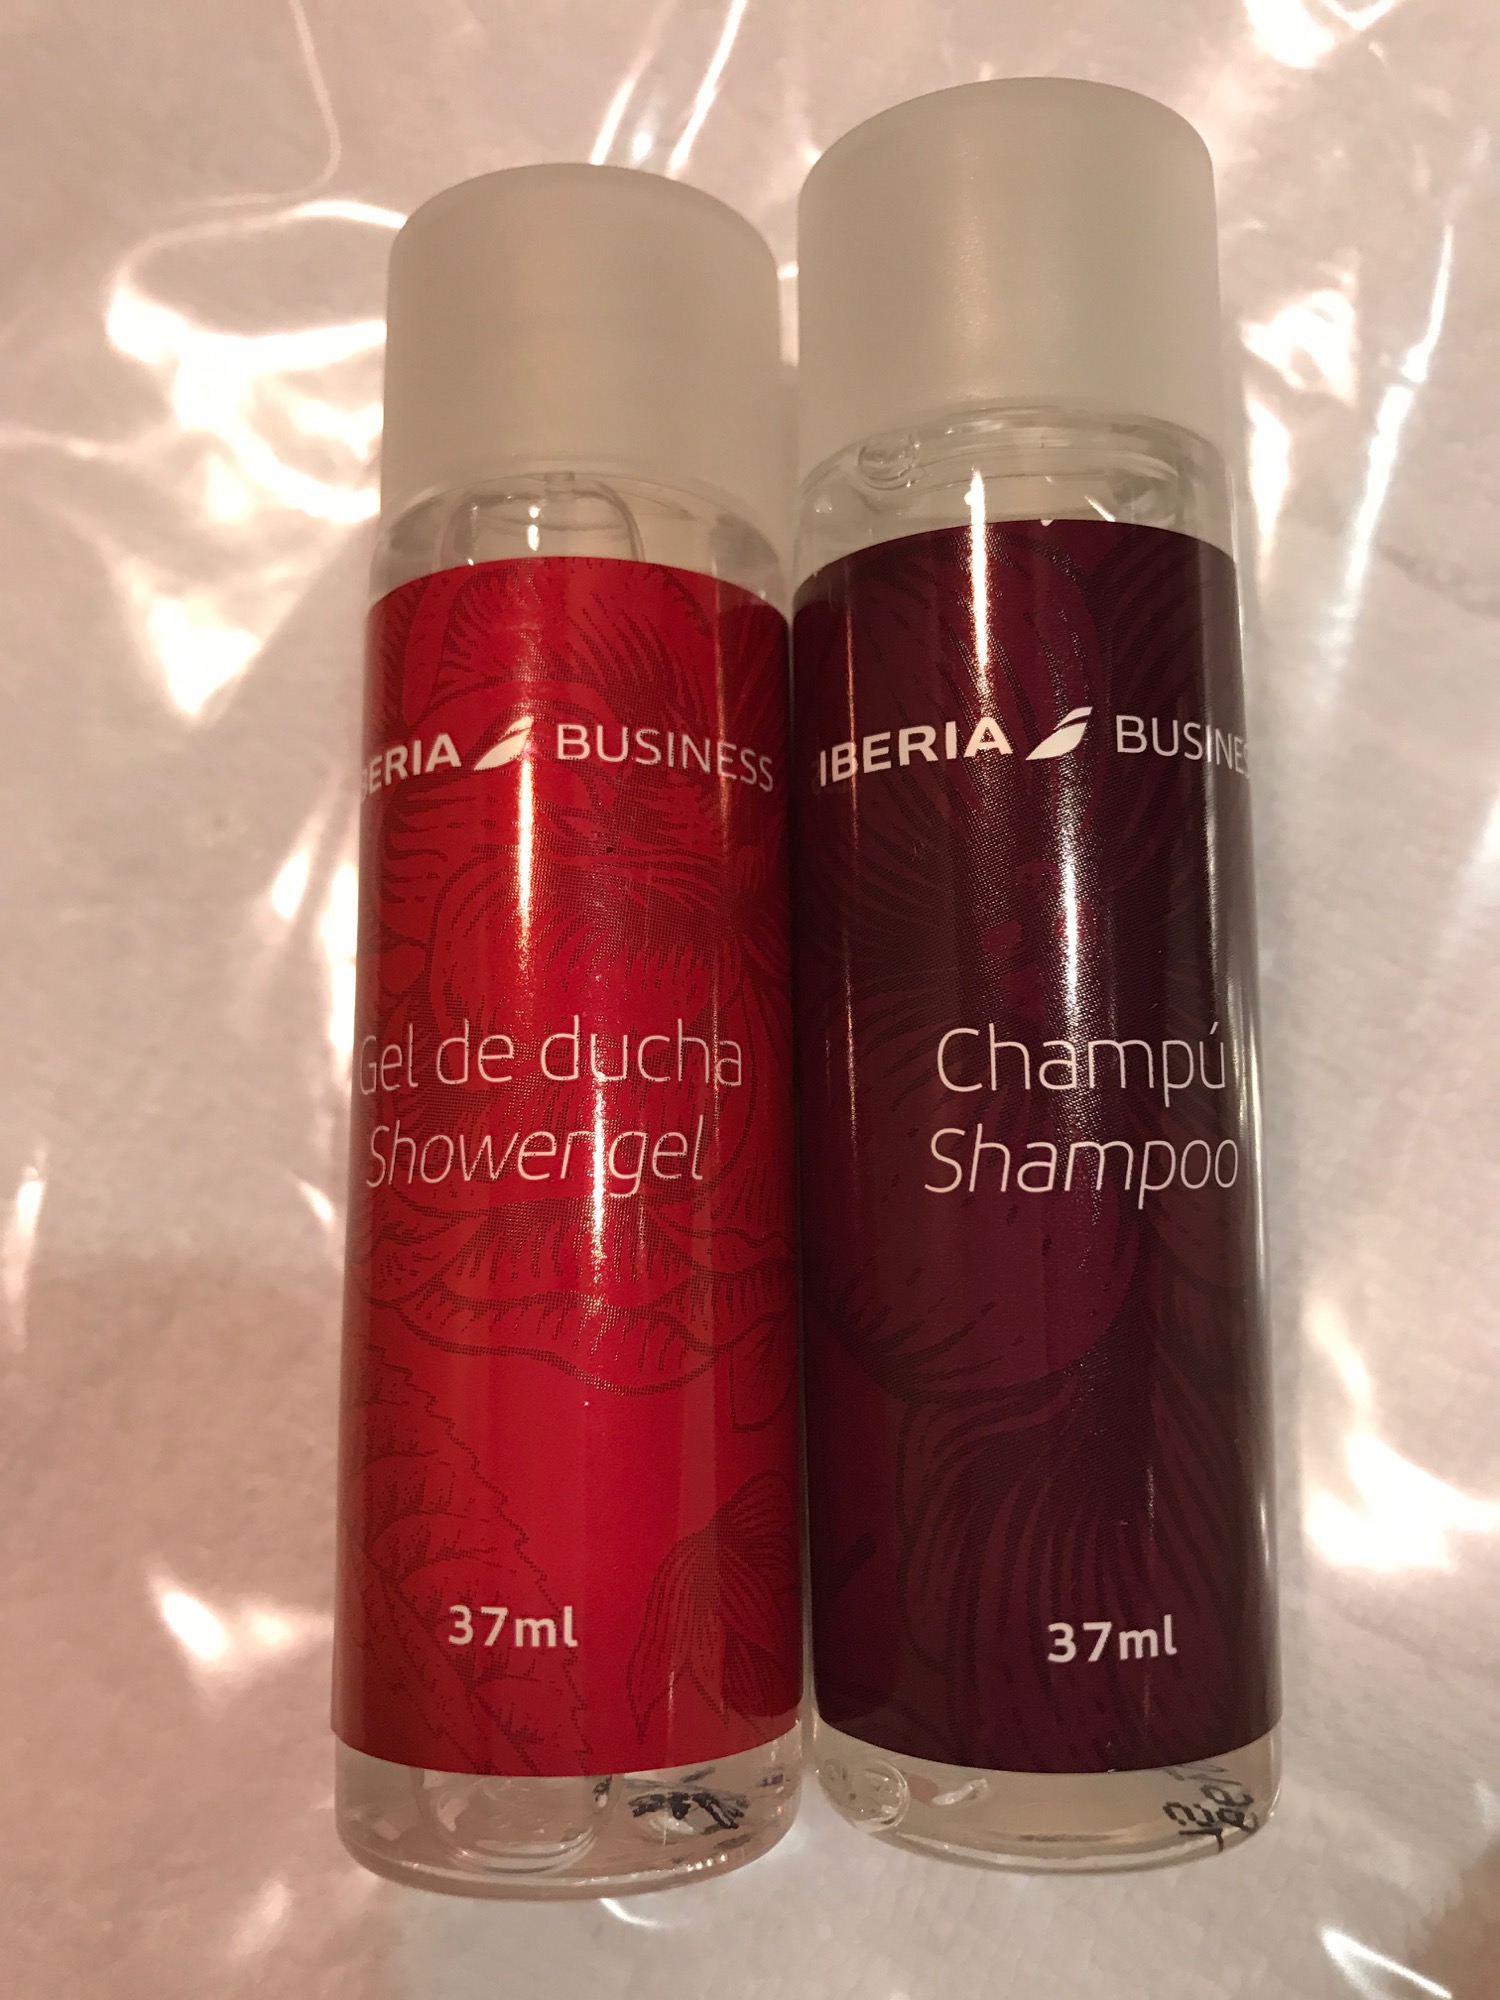 two bottles of shampoo on a white surface